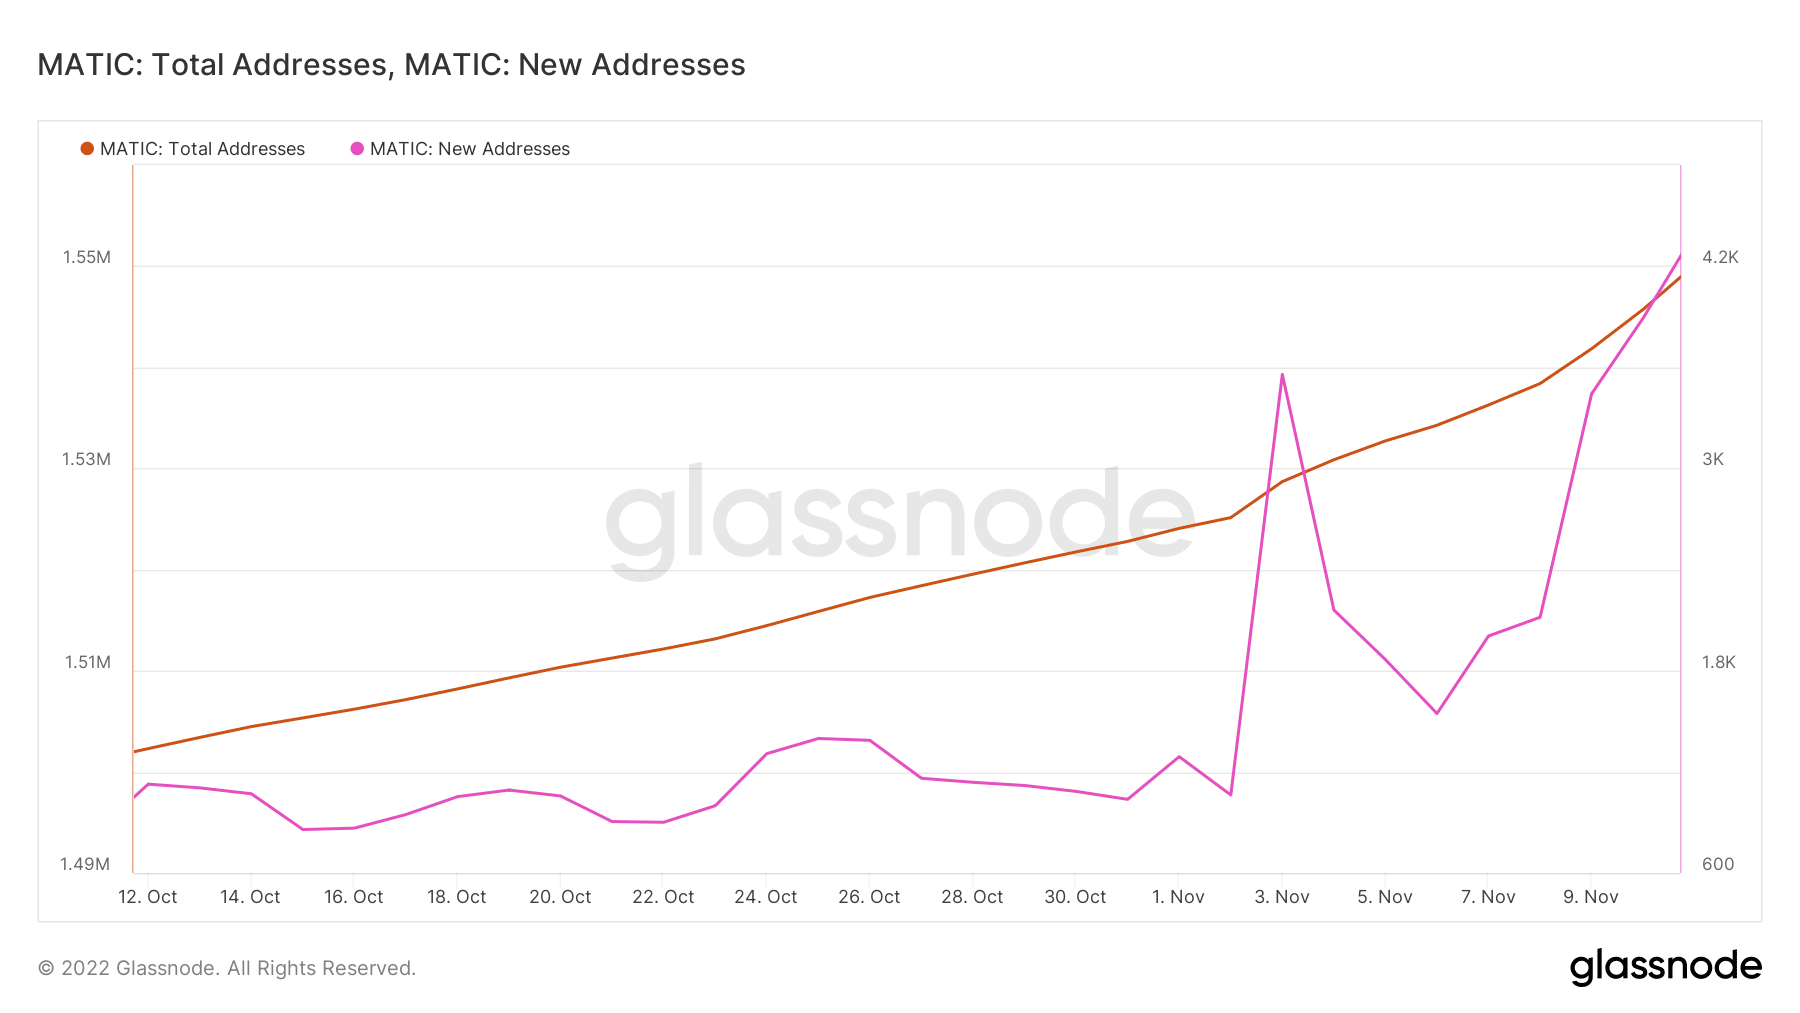 MATIC growth based on addresses